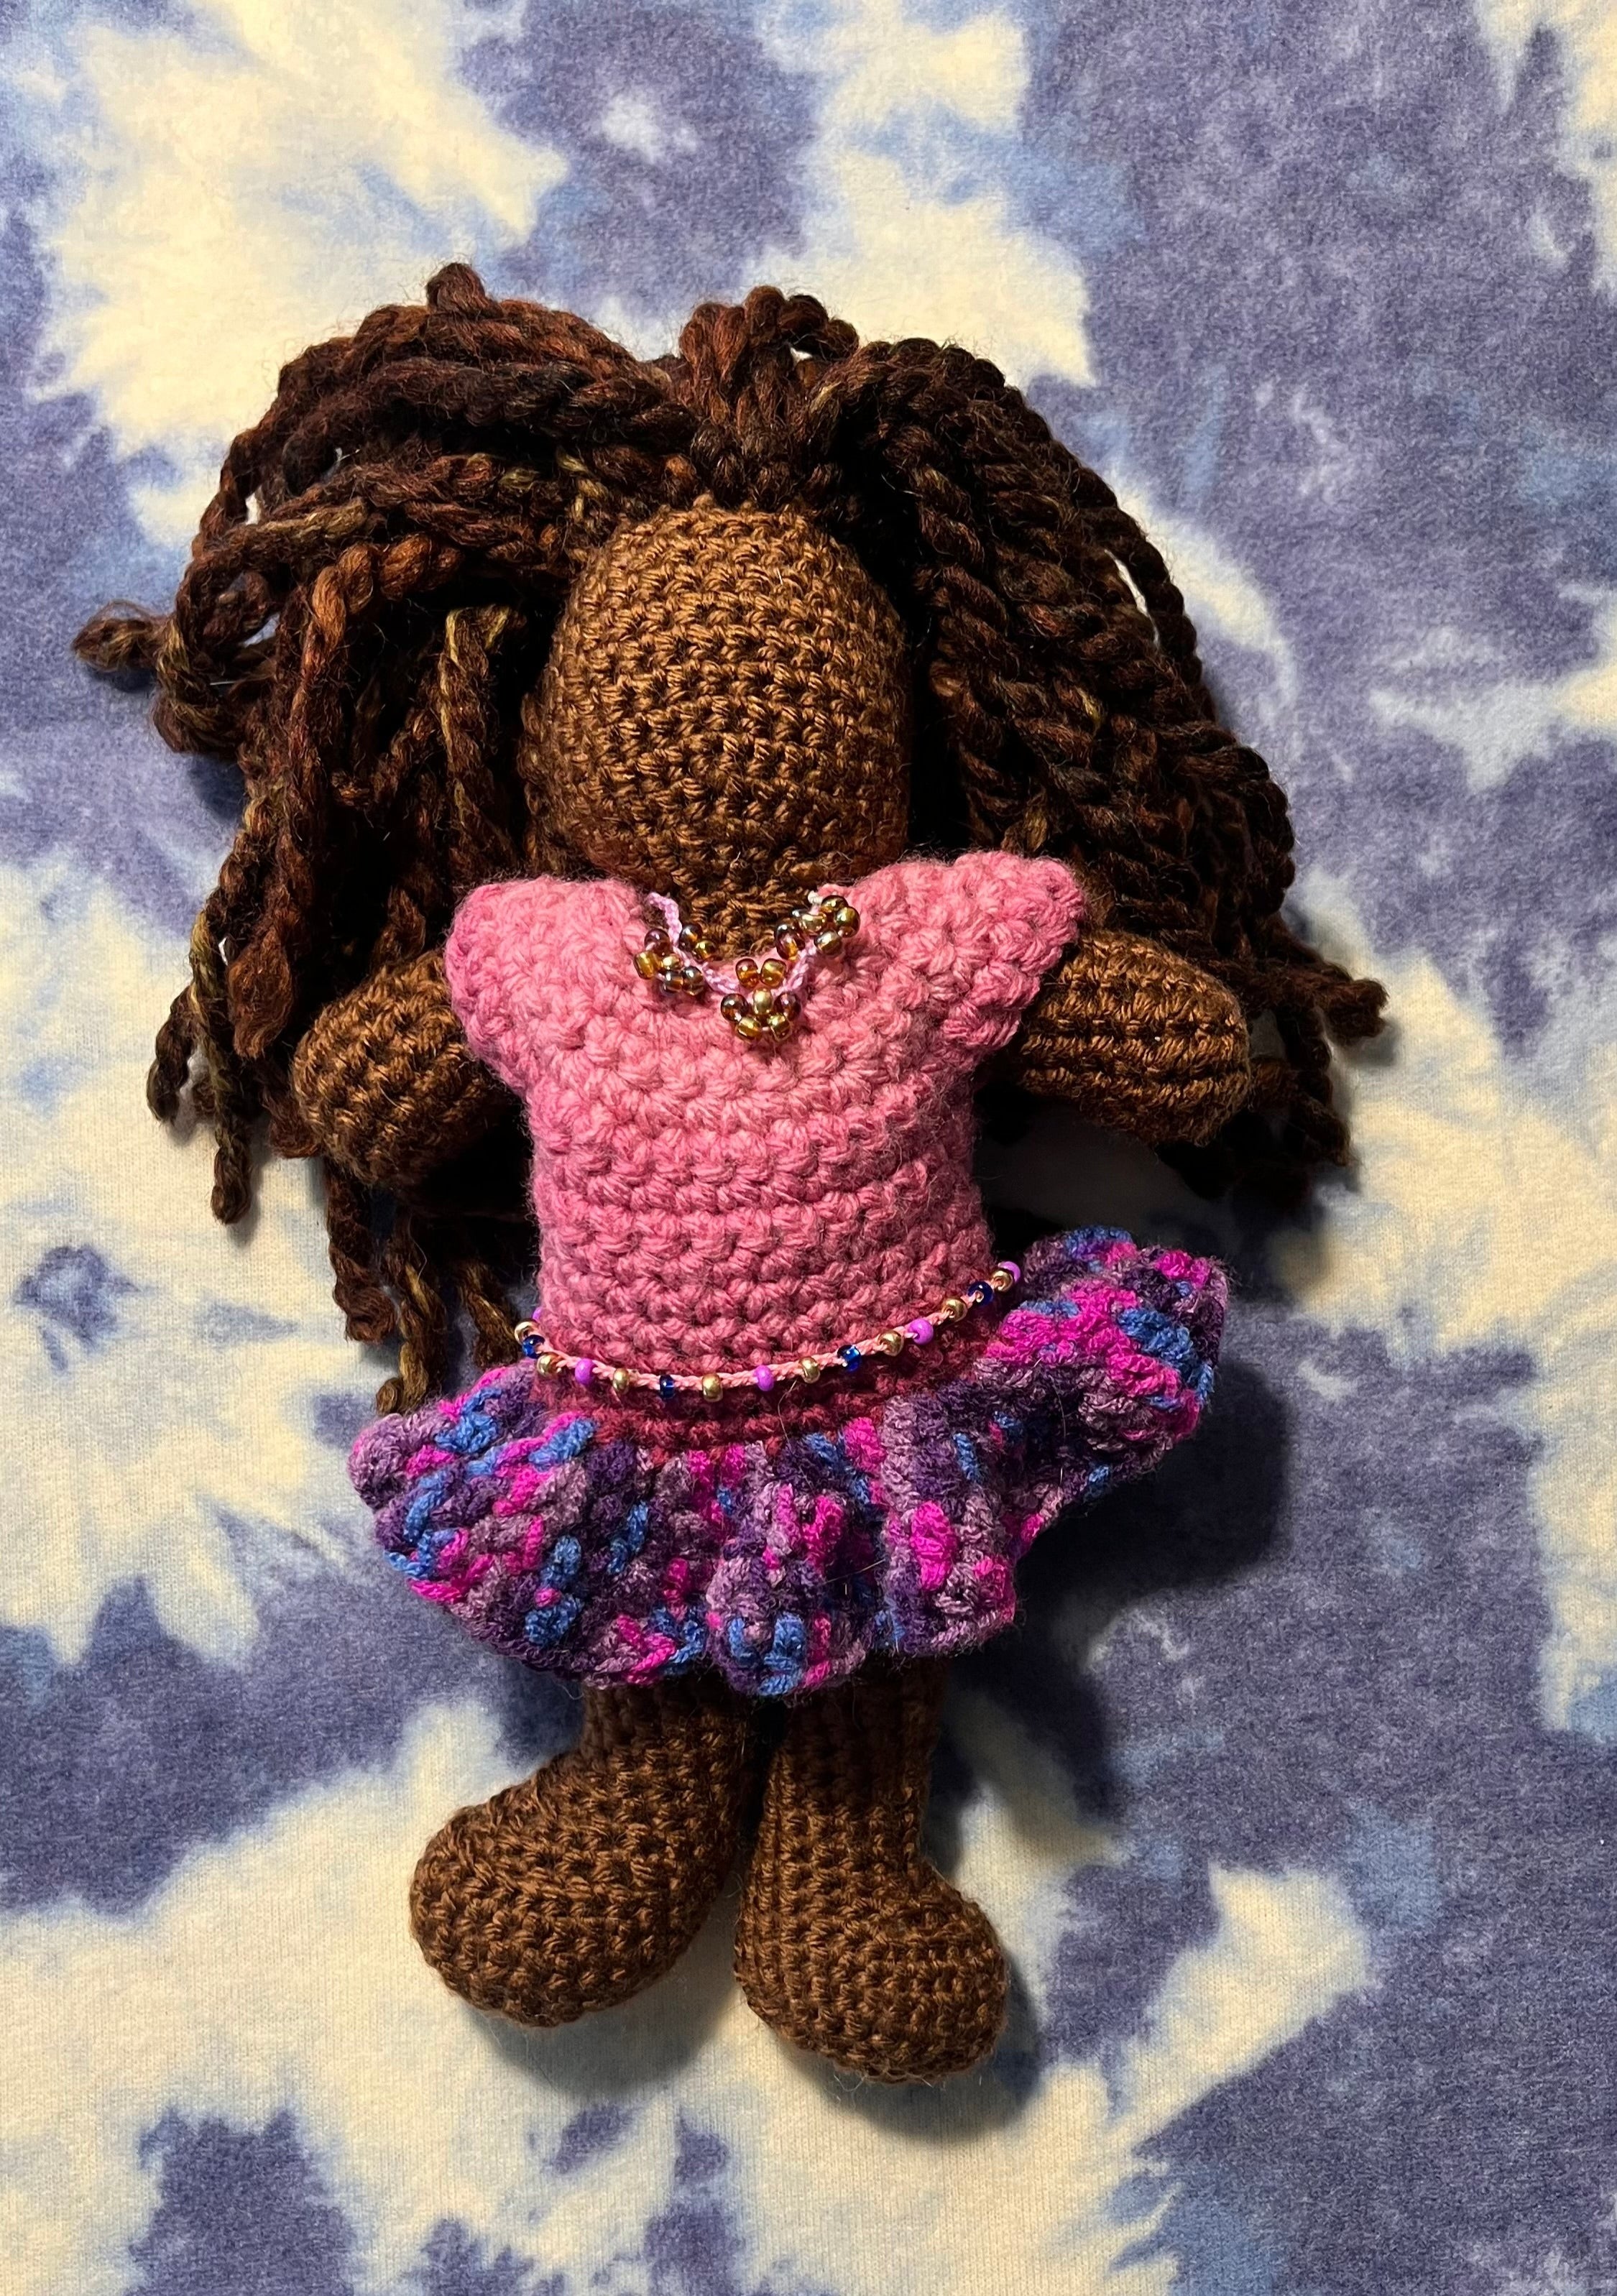 brown skinned crochet doll with brown twisted yarn hair. The doll is wearing a pink snd purple dress with a beaded necklace and waistbeads